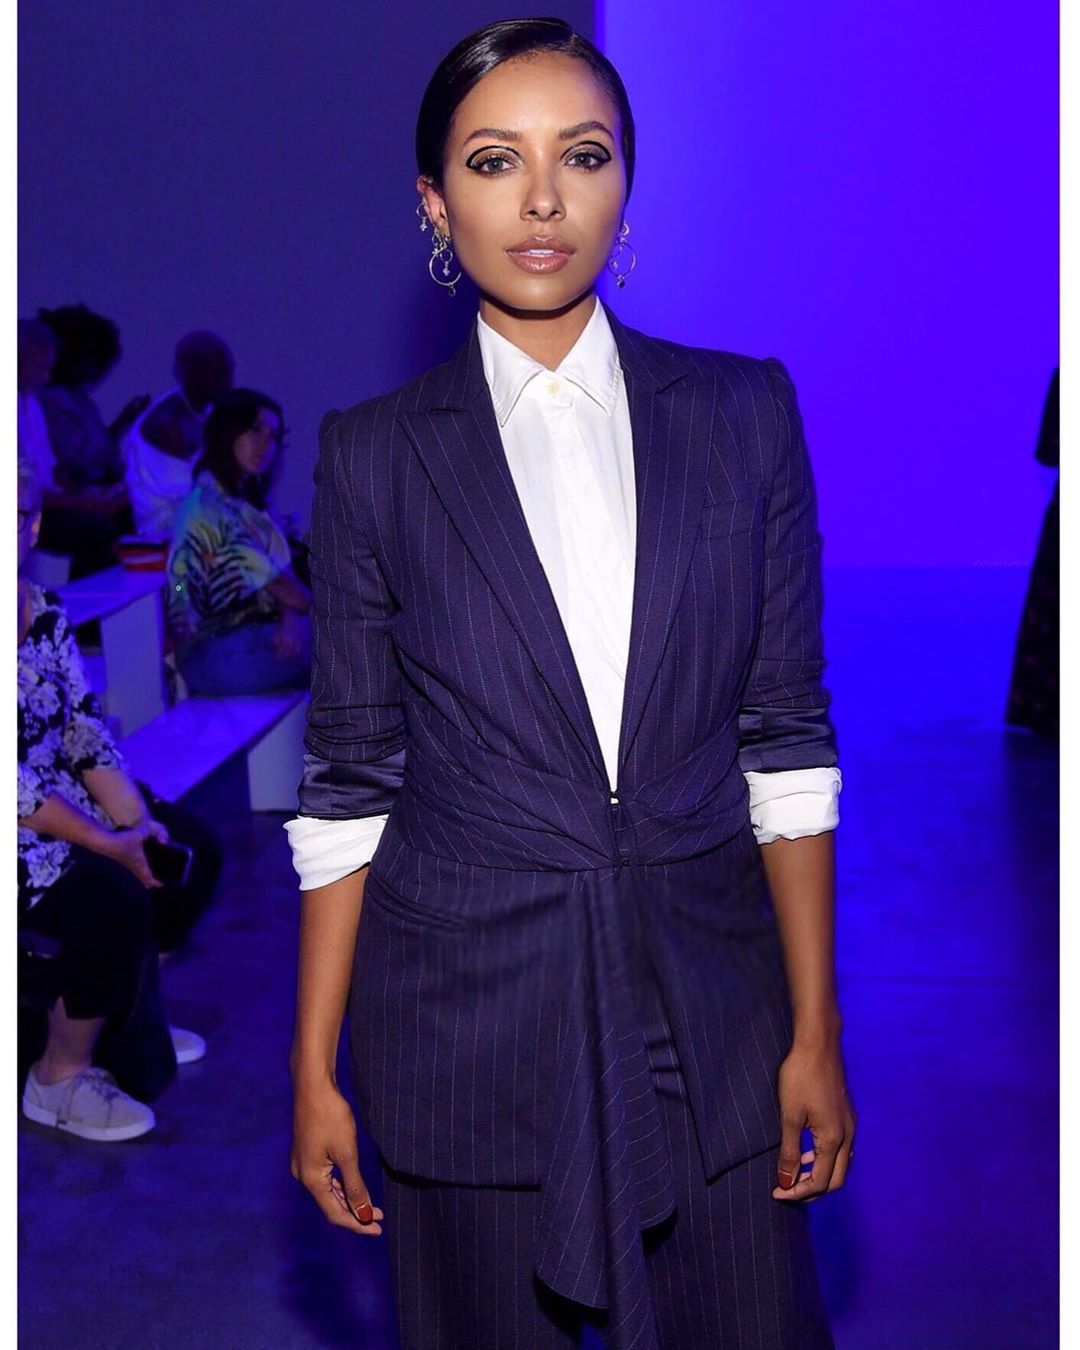 These Are The Best Dressed Celebs at NYFW